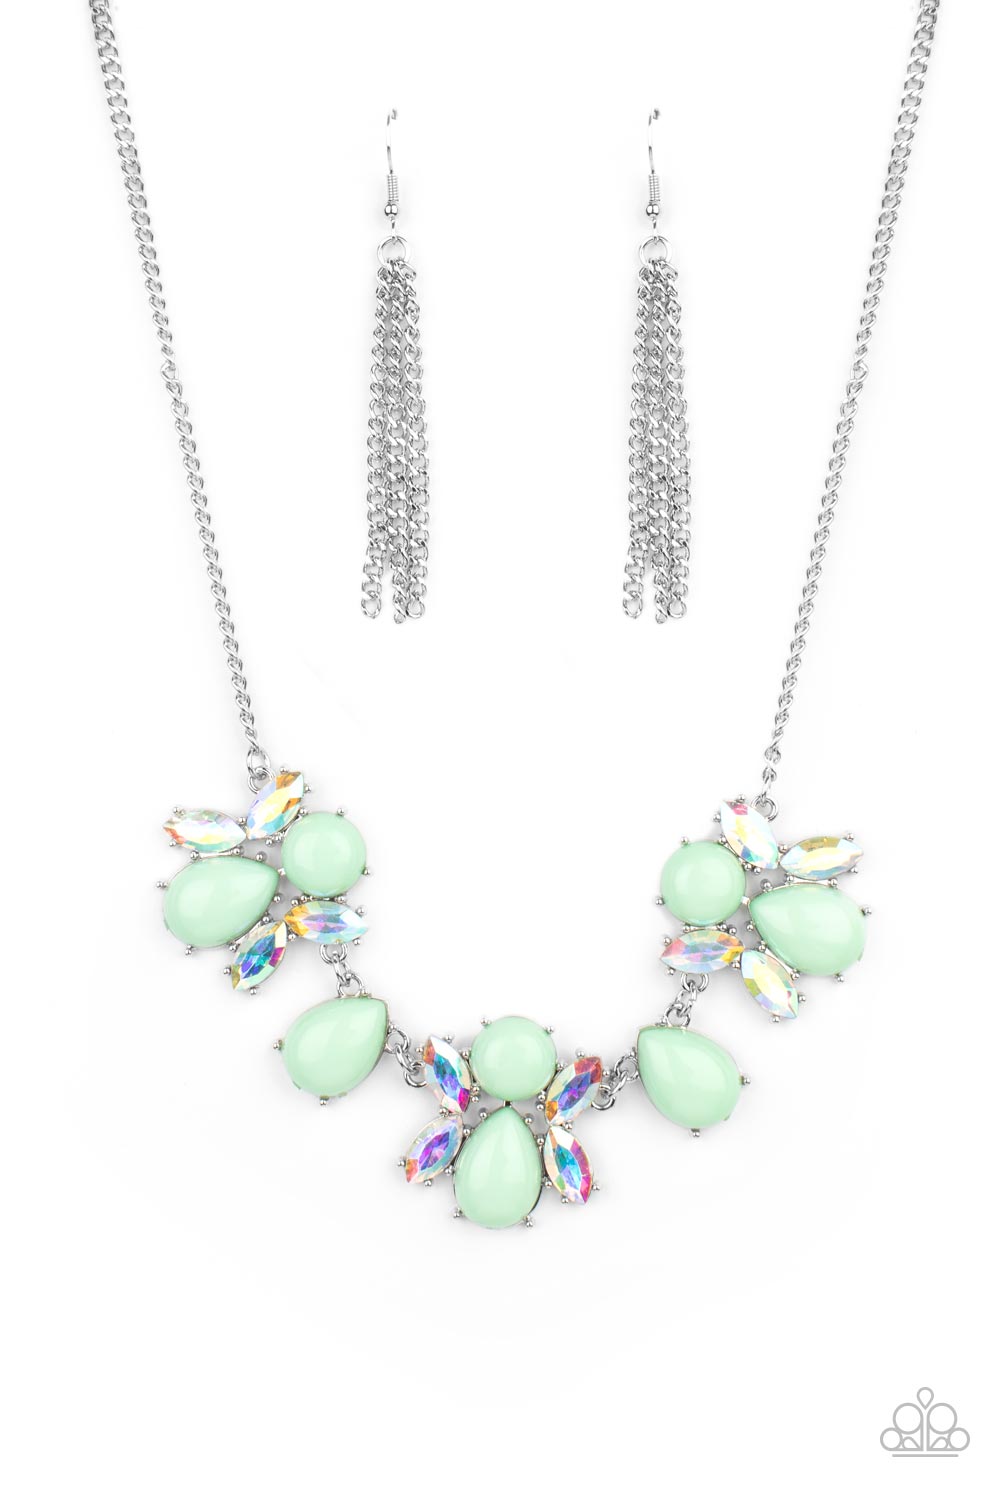 Galaxy Gallery - Green and Iridescent Rhinestone Necklace